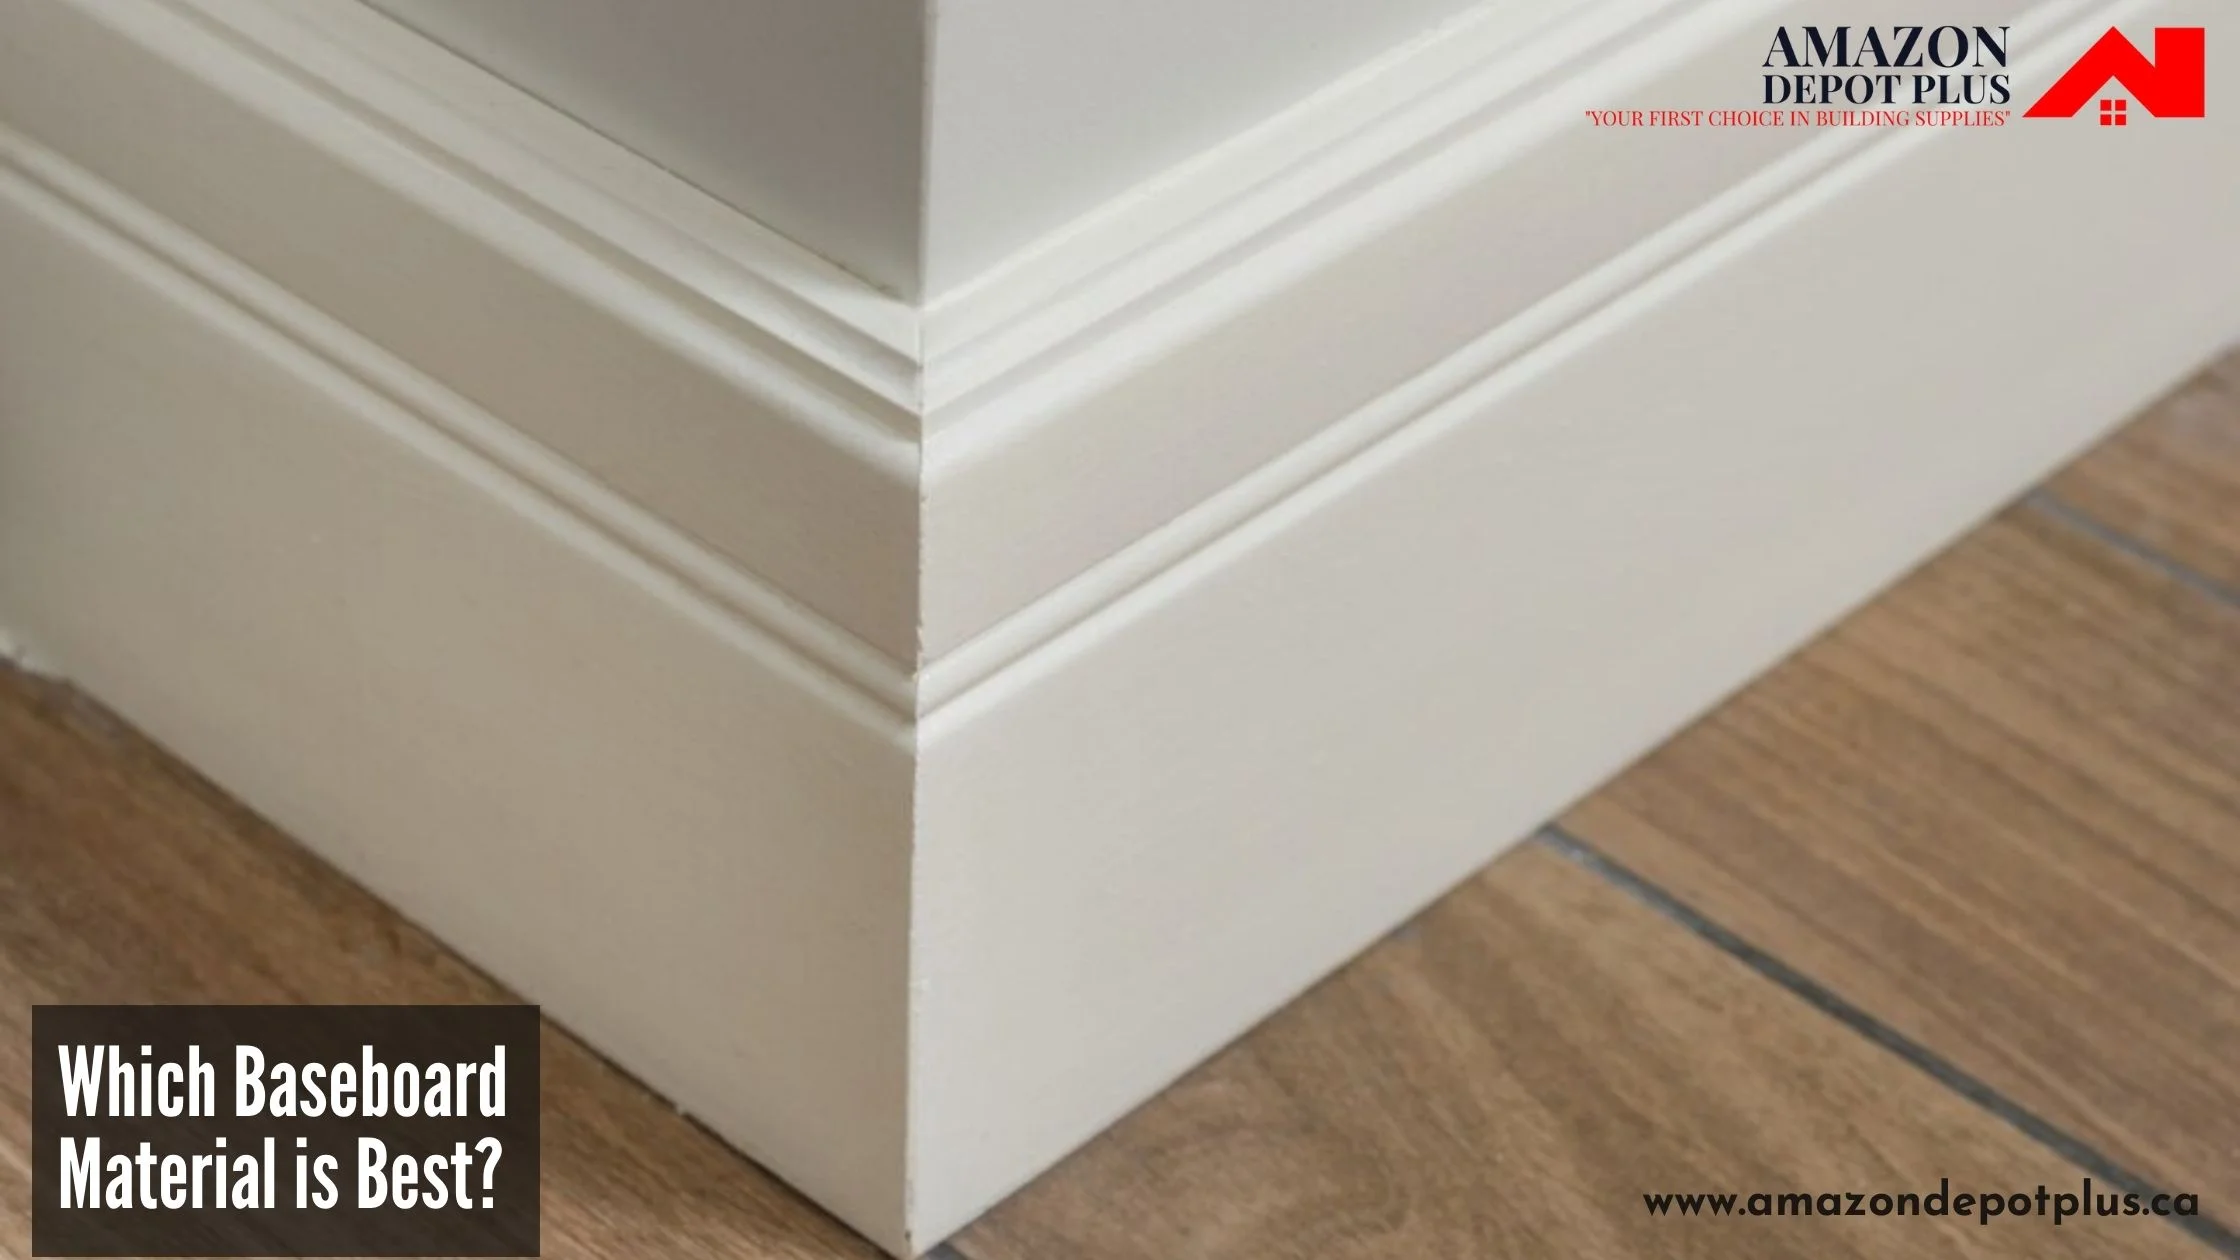 Which Baseboard Material is Best?